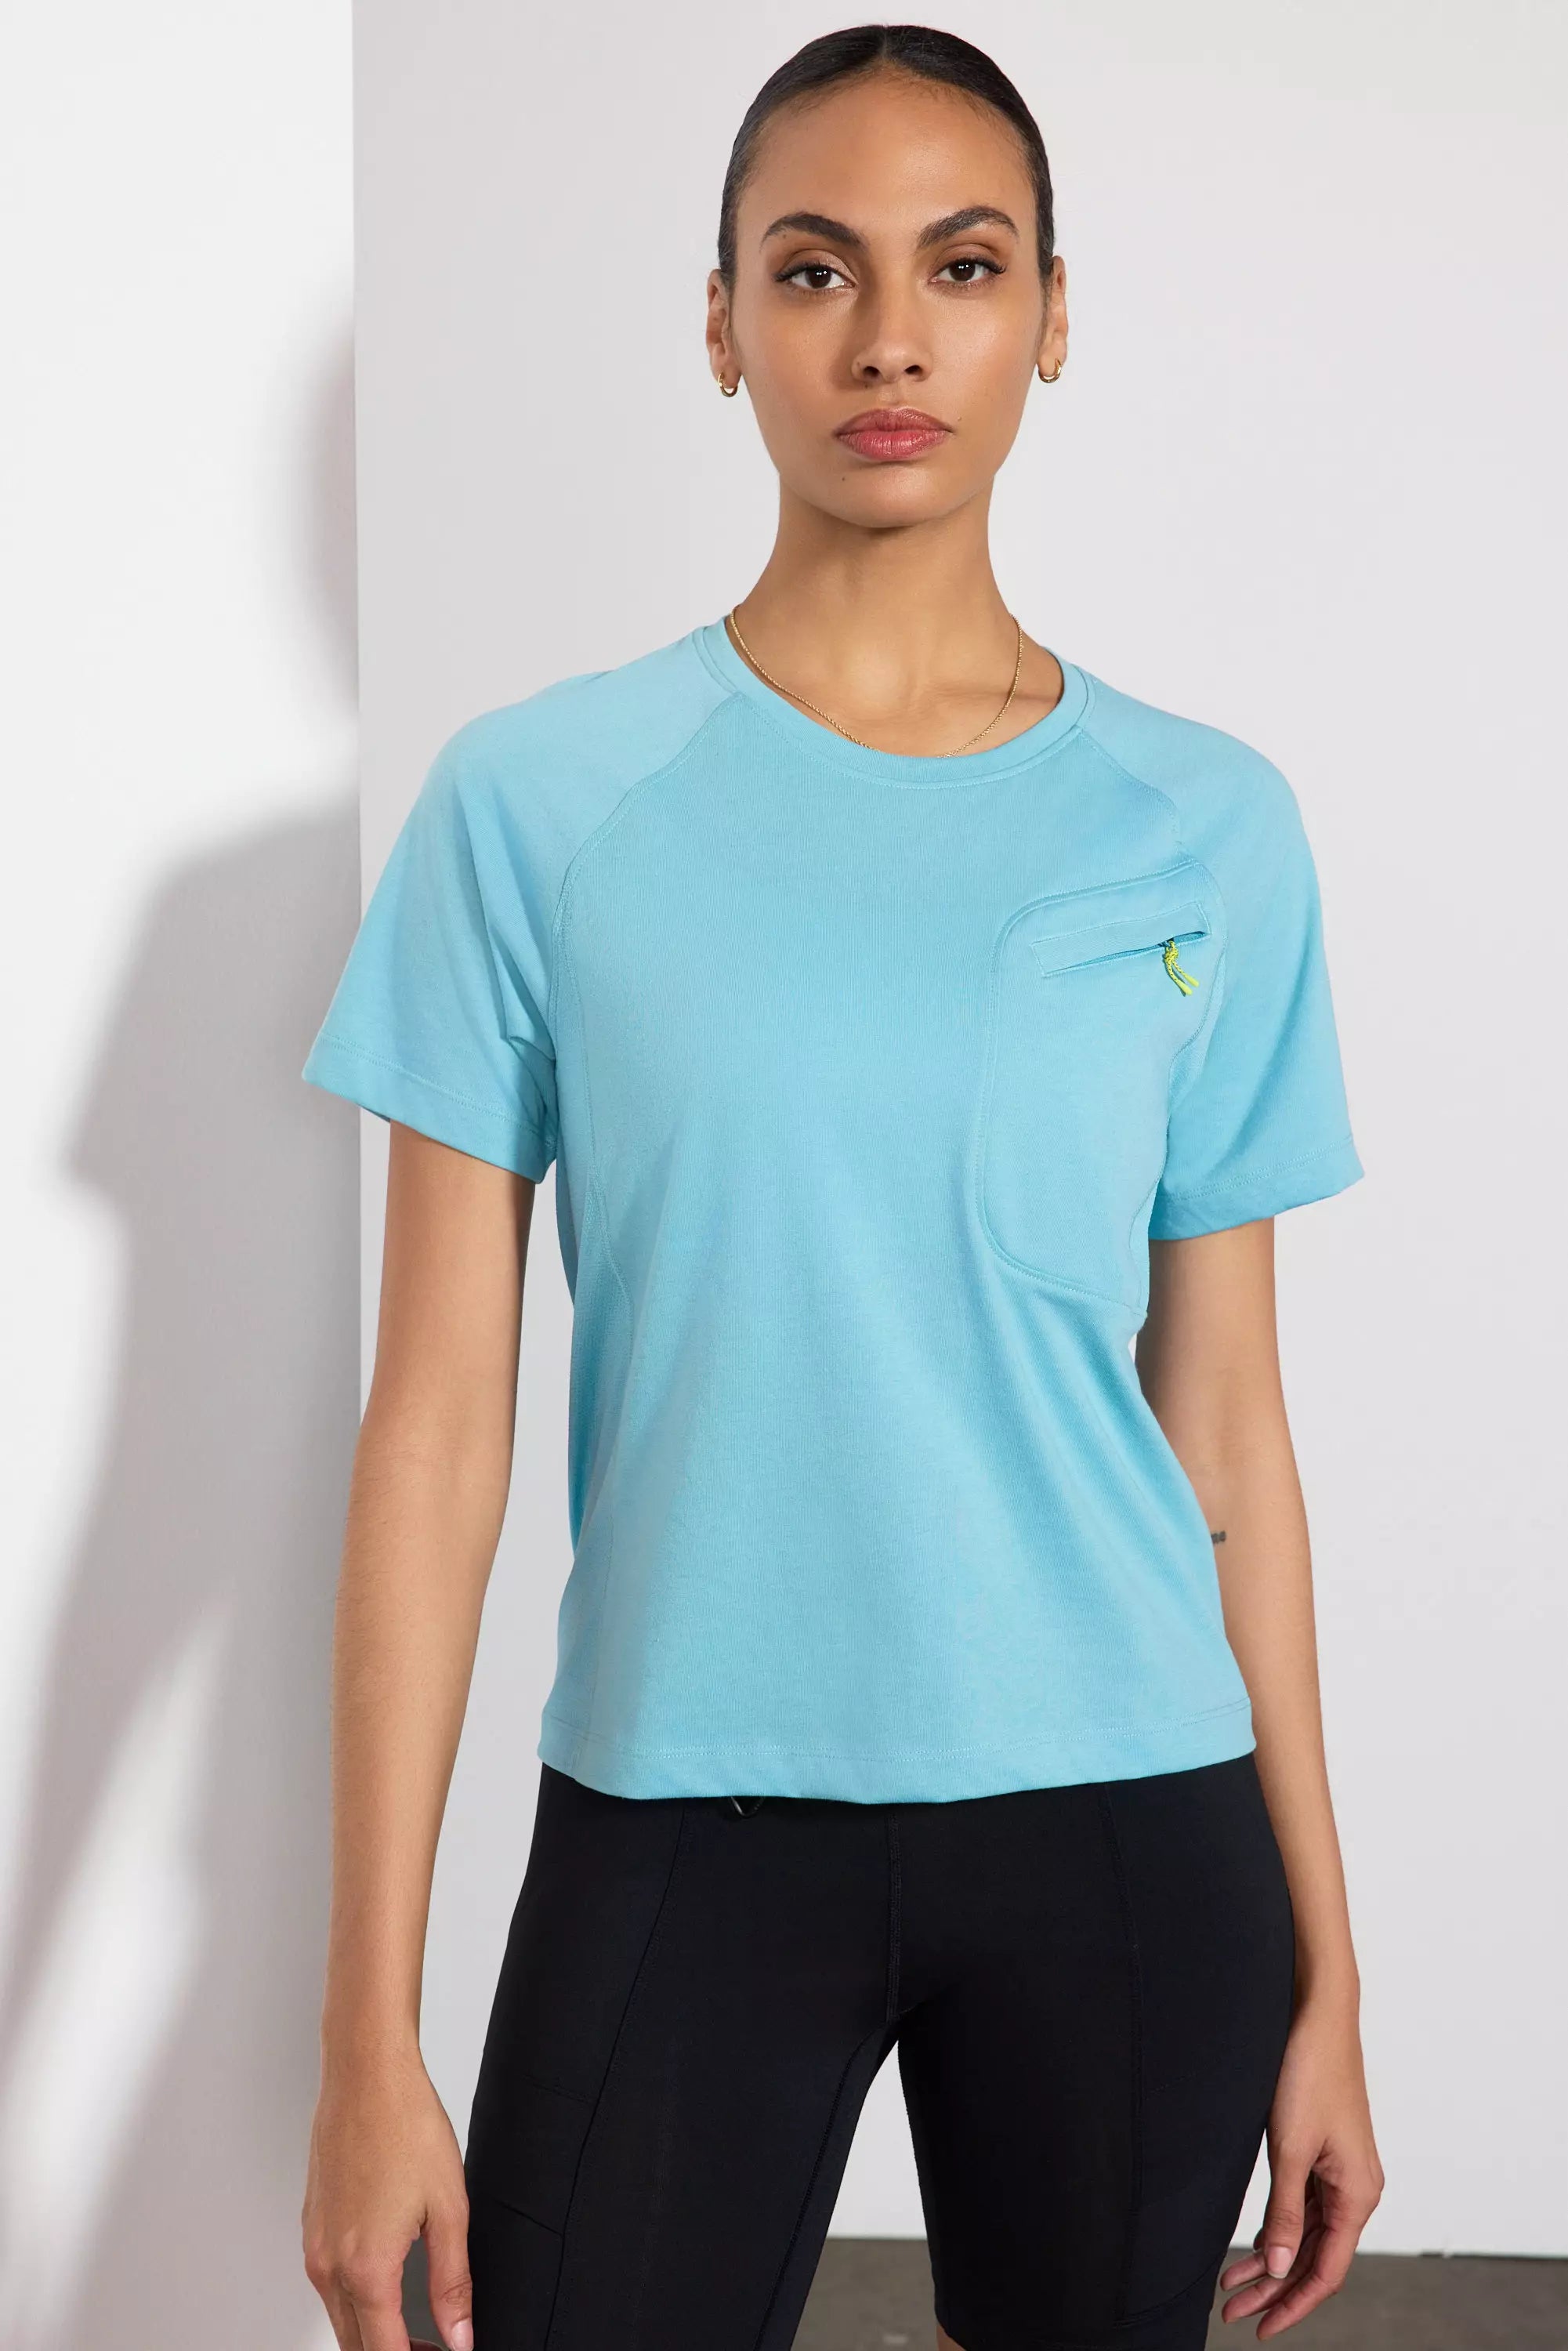 Achieve Pocket Tee with Mesh Panel - Reef Waters